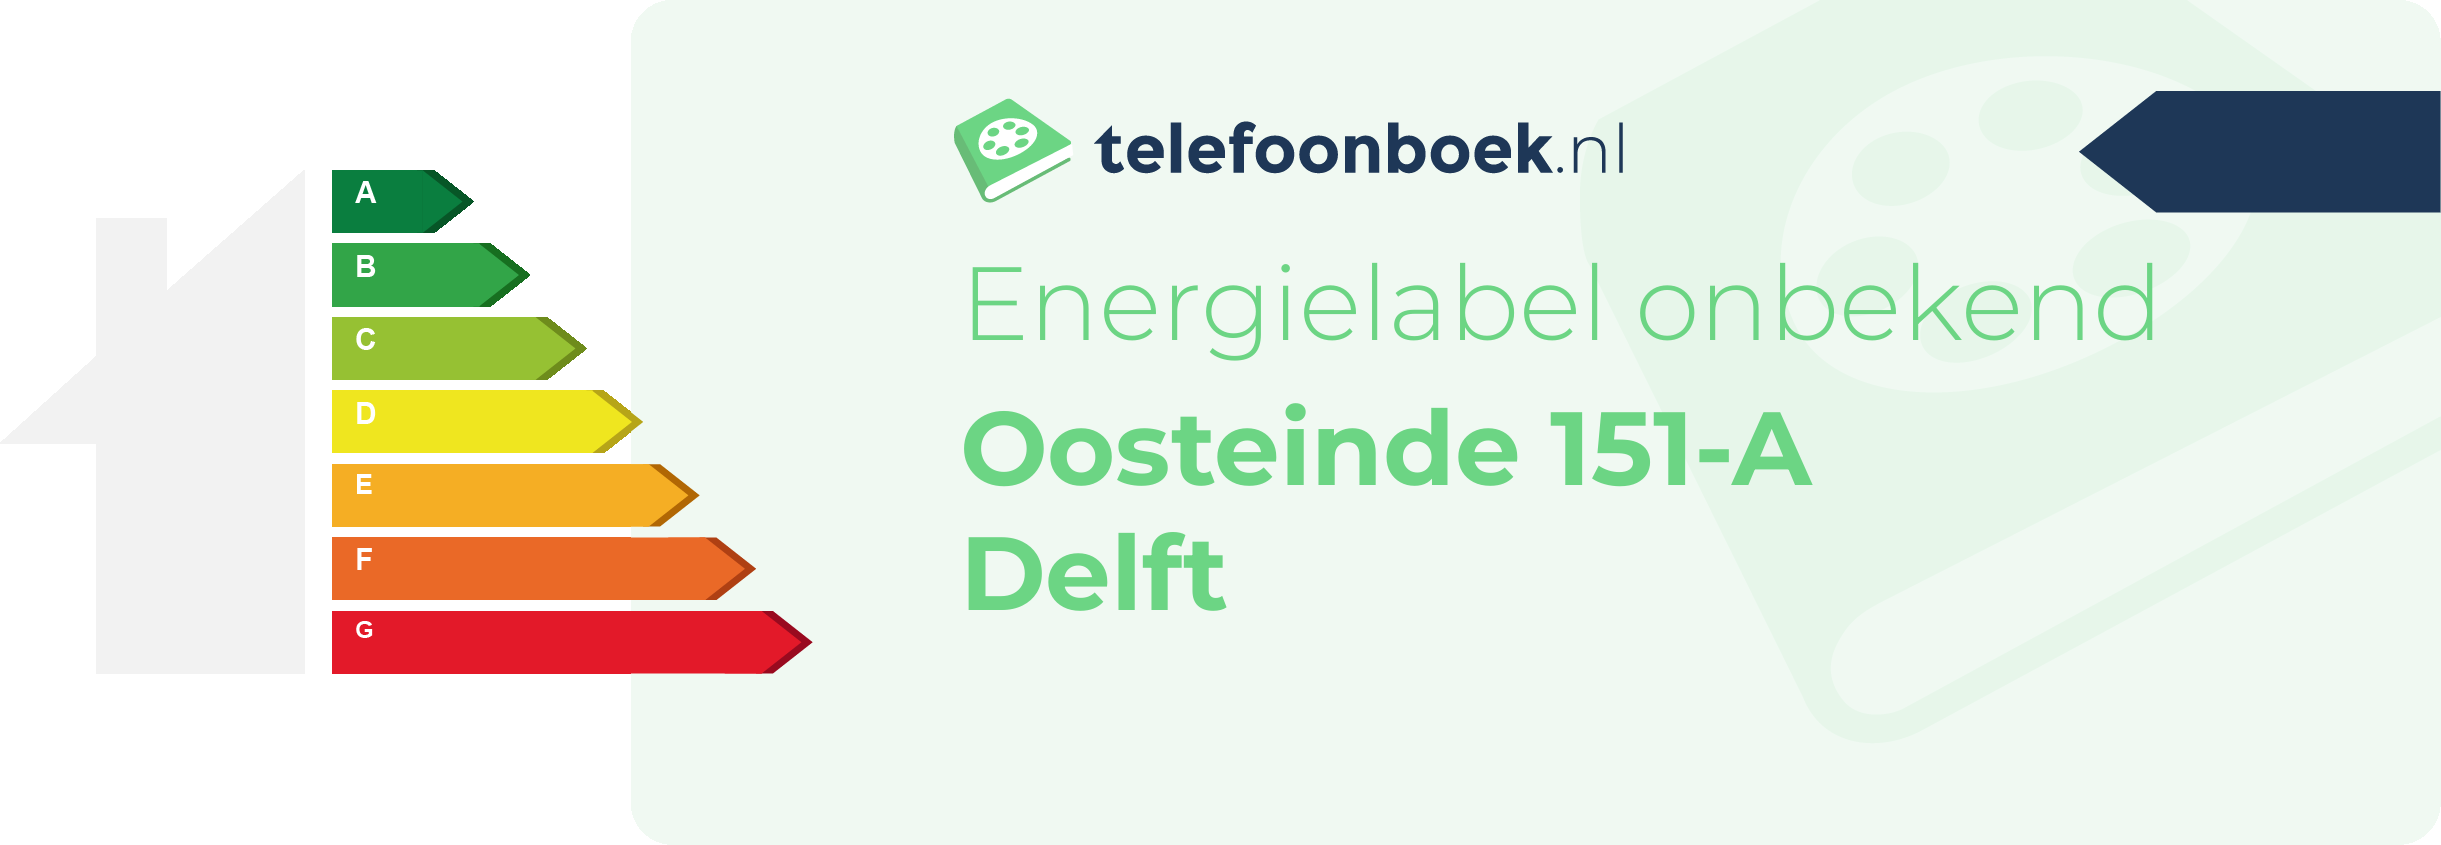 Energielabel Oosteinde 151-A Delft